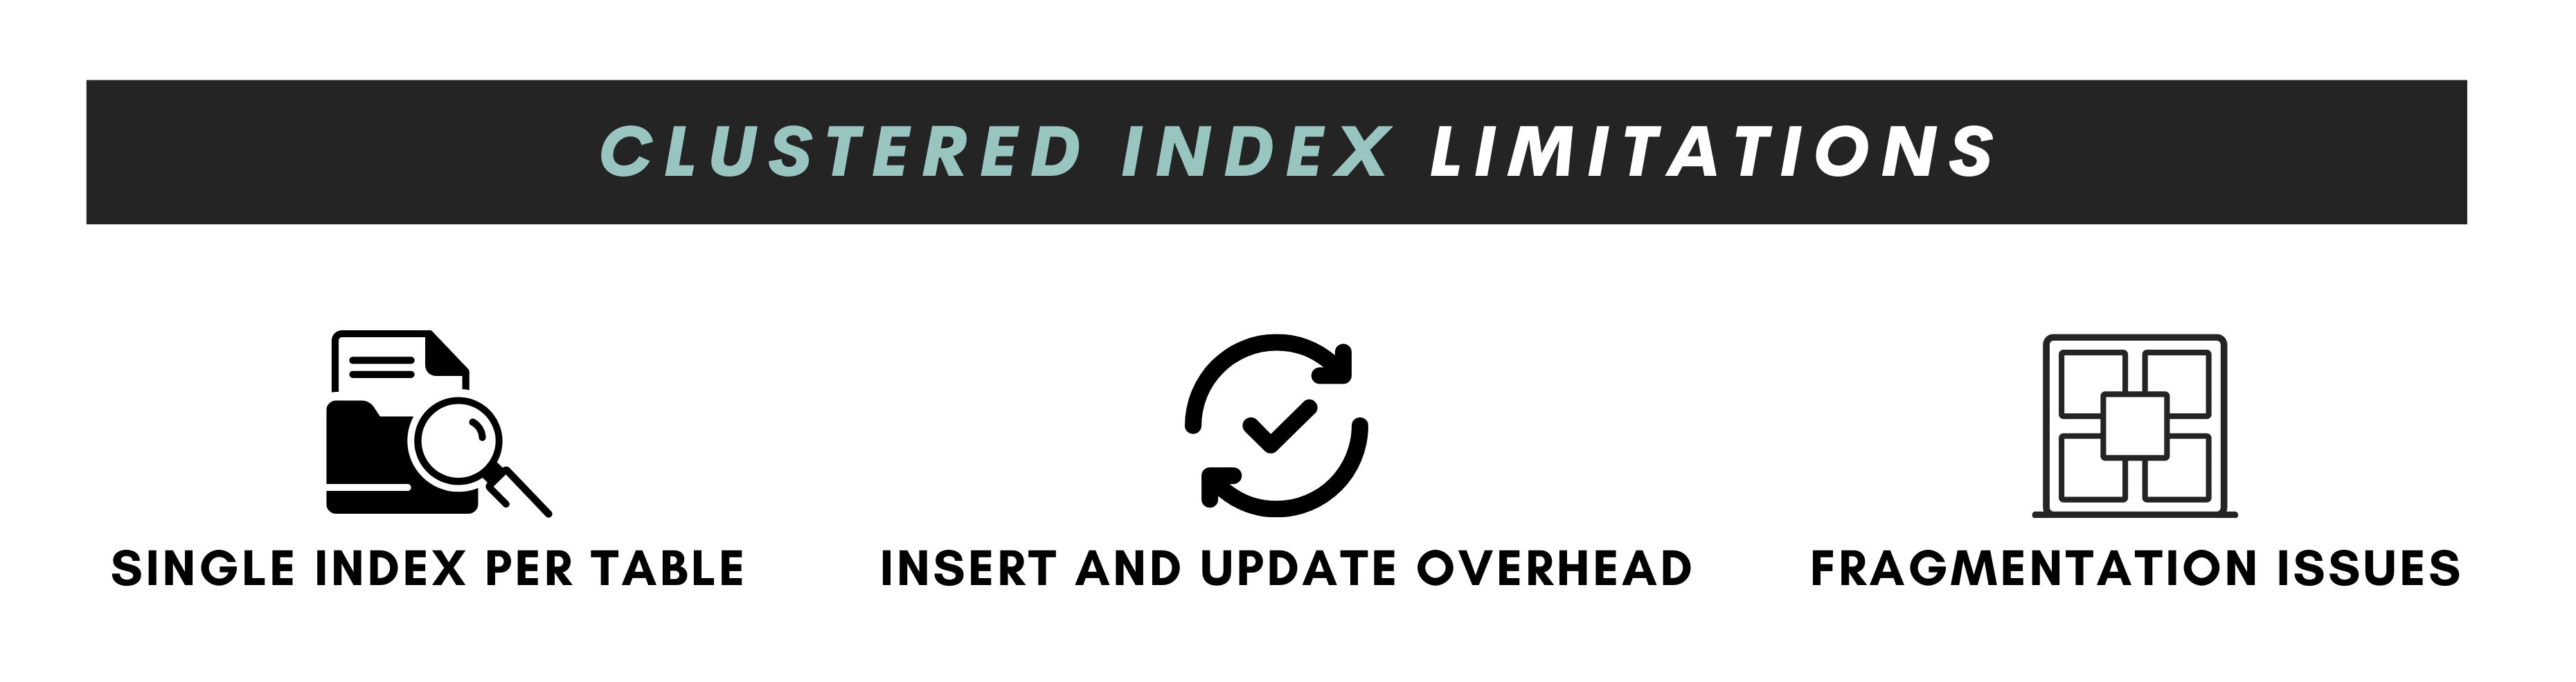 Limitations of Clustered Index